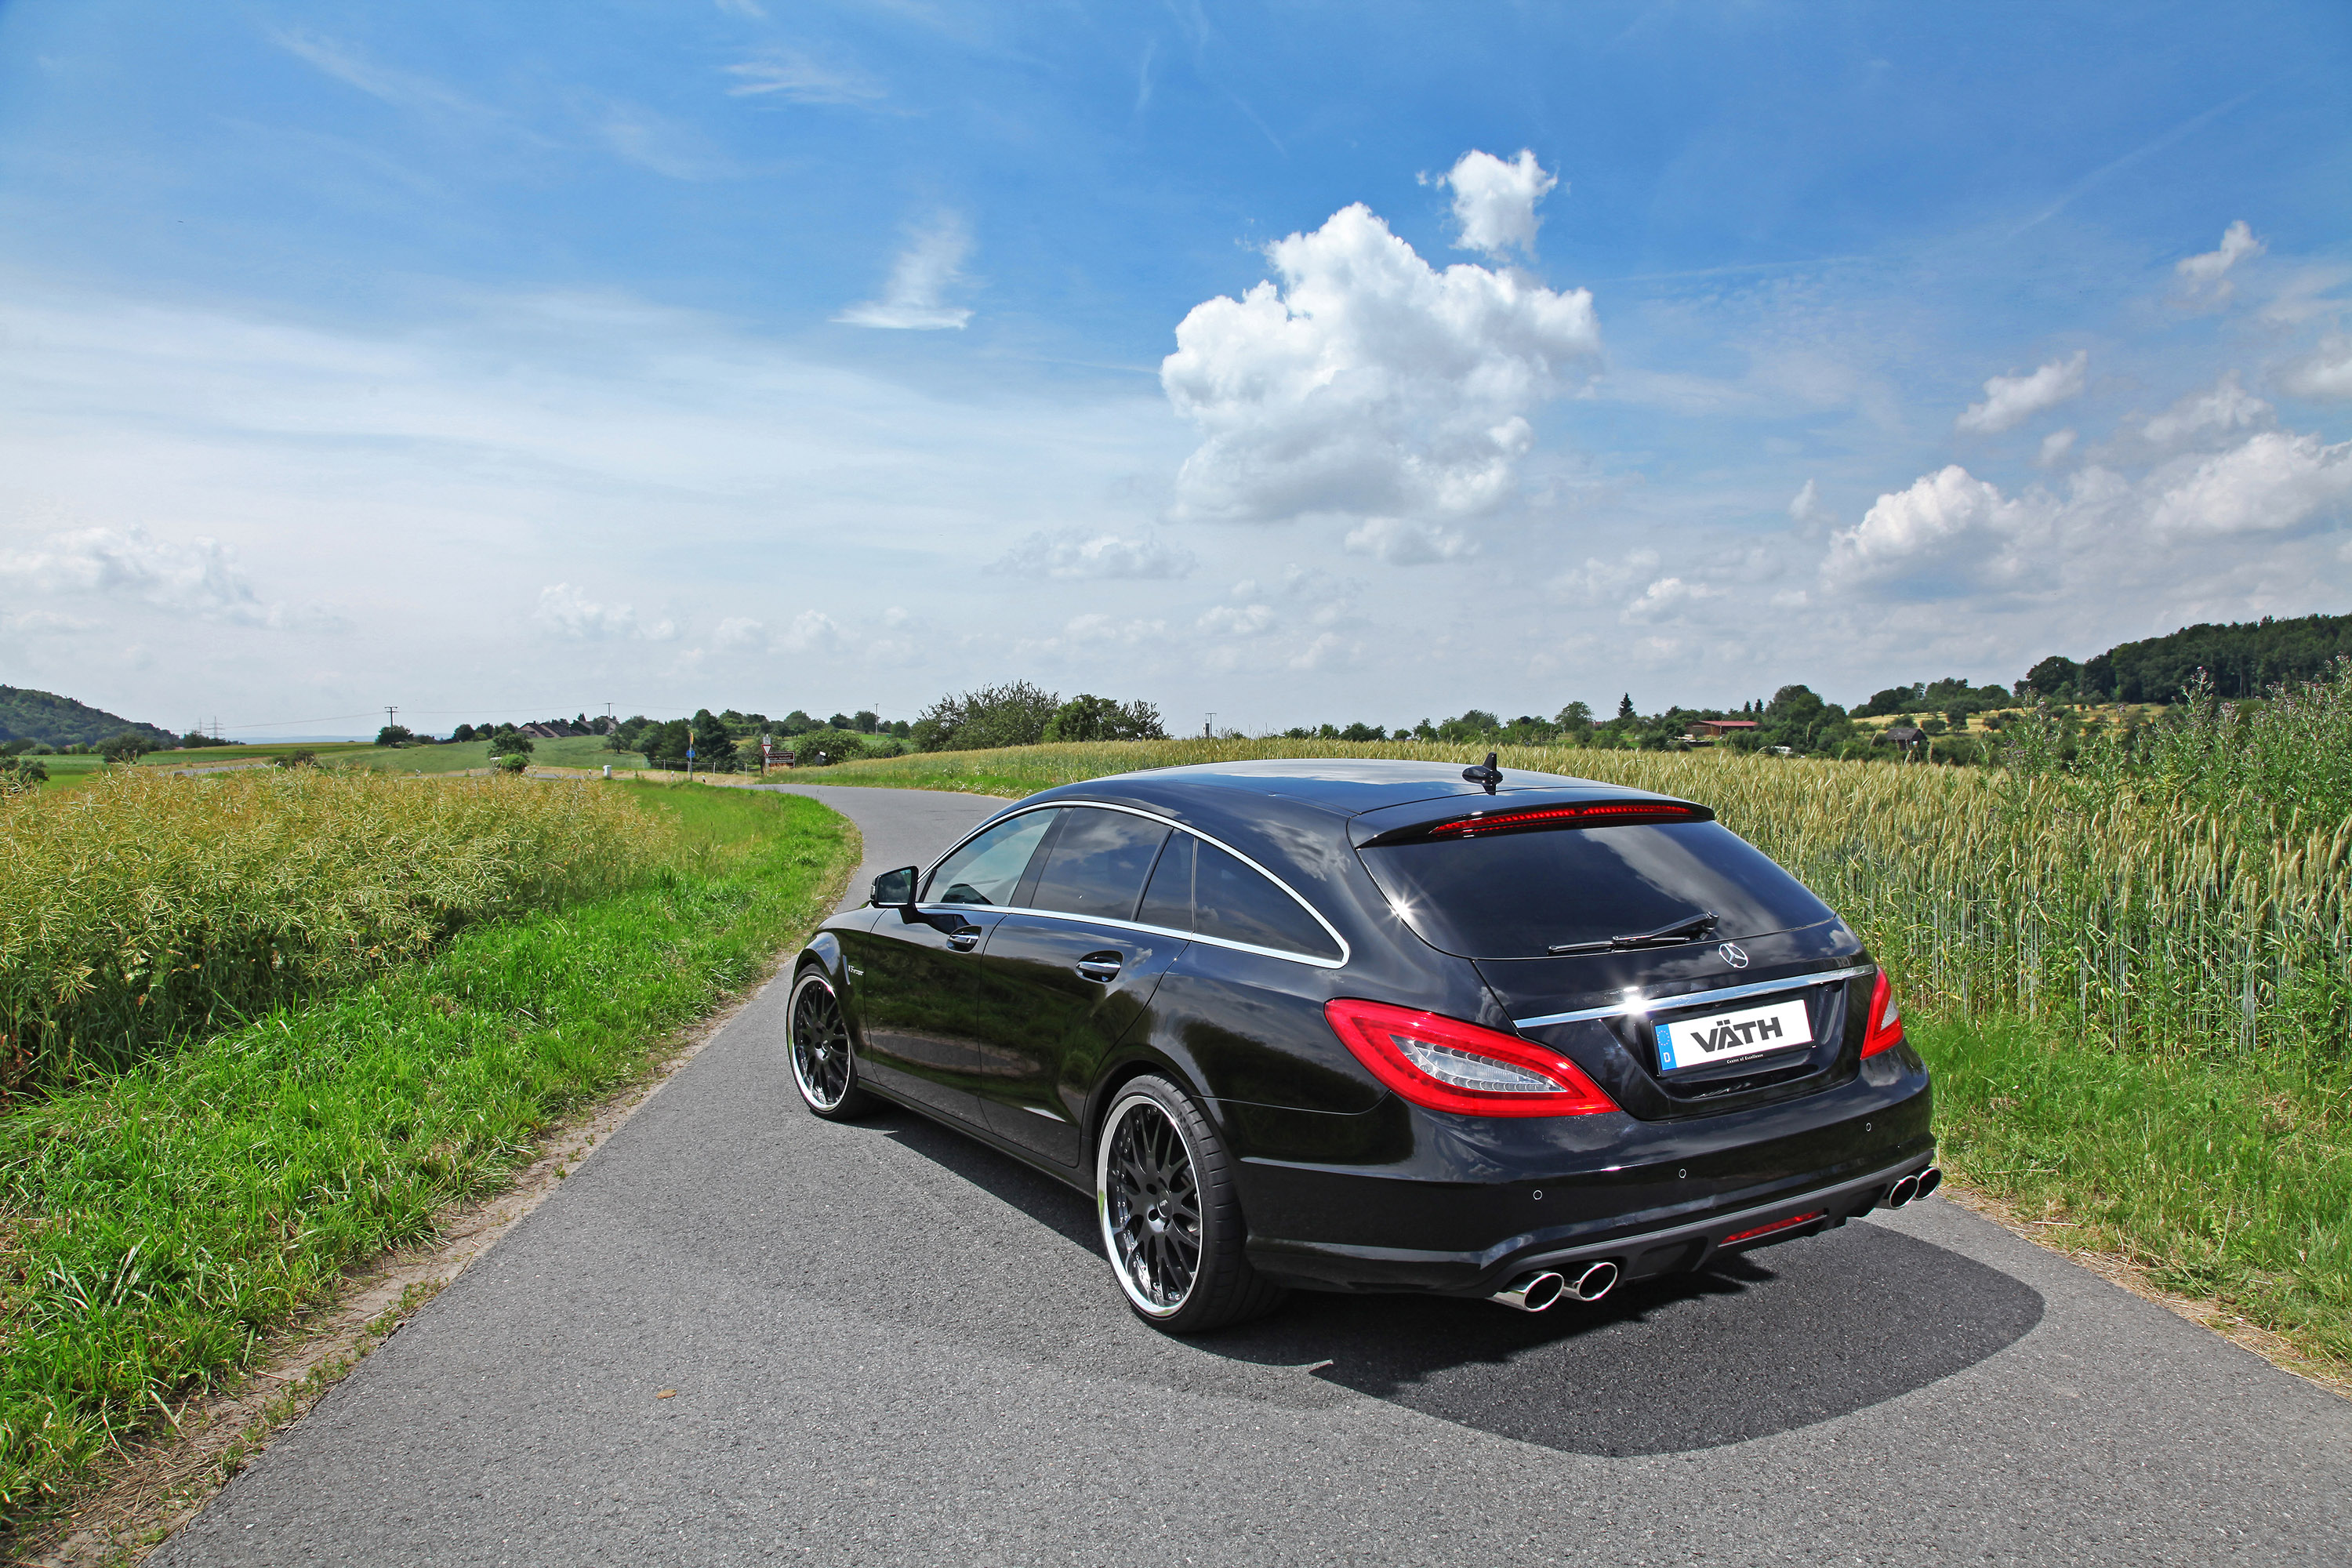 VATH Mercedes-Benz CLS 63 AMG Shooting Brake - 846HP and 1 ...